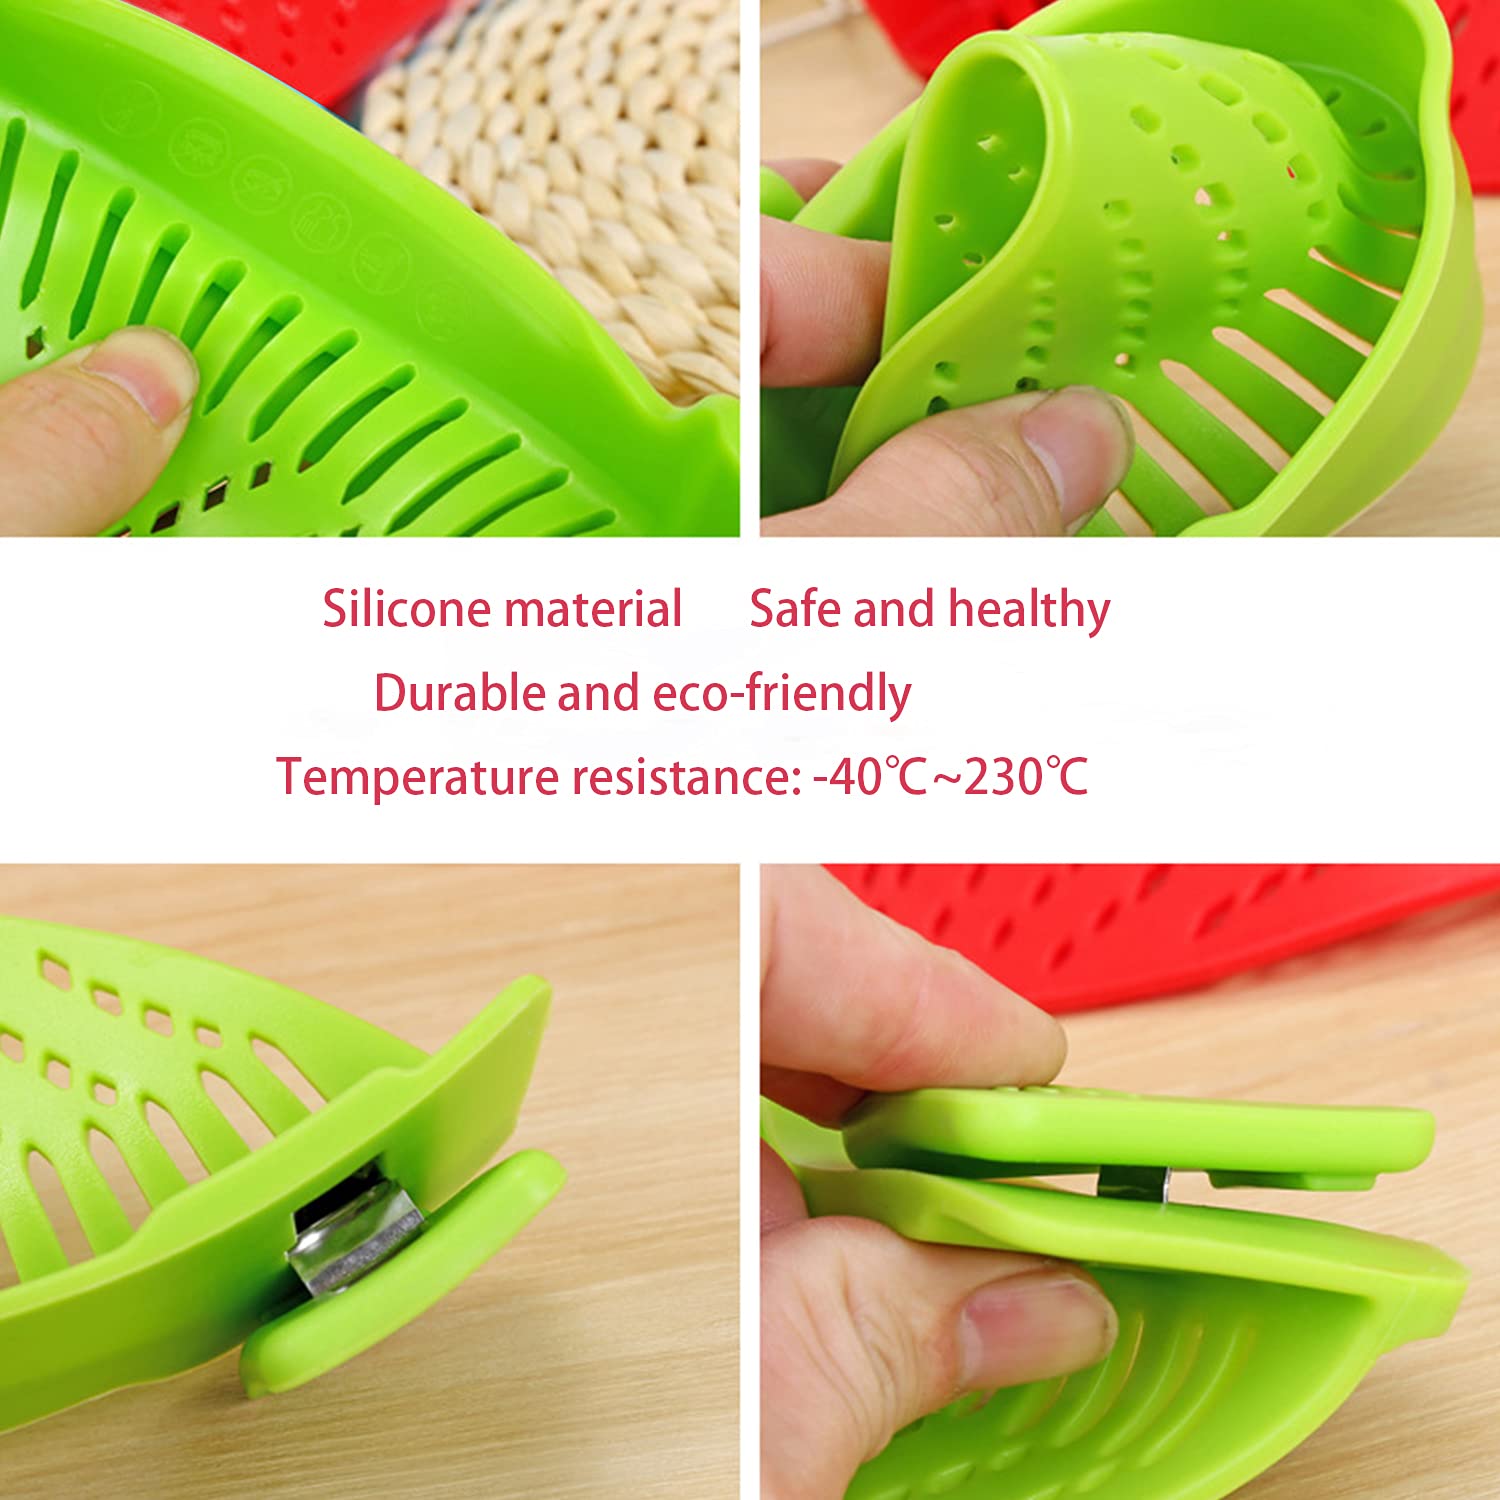 Great Choice Products 2 Pack Silicone Food Strainer-Clip On Strainer Colander Pots Bowls For Pan Pasta Vegetables Fruits, Hands-Free